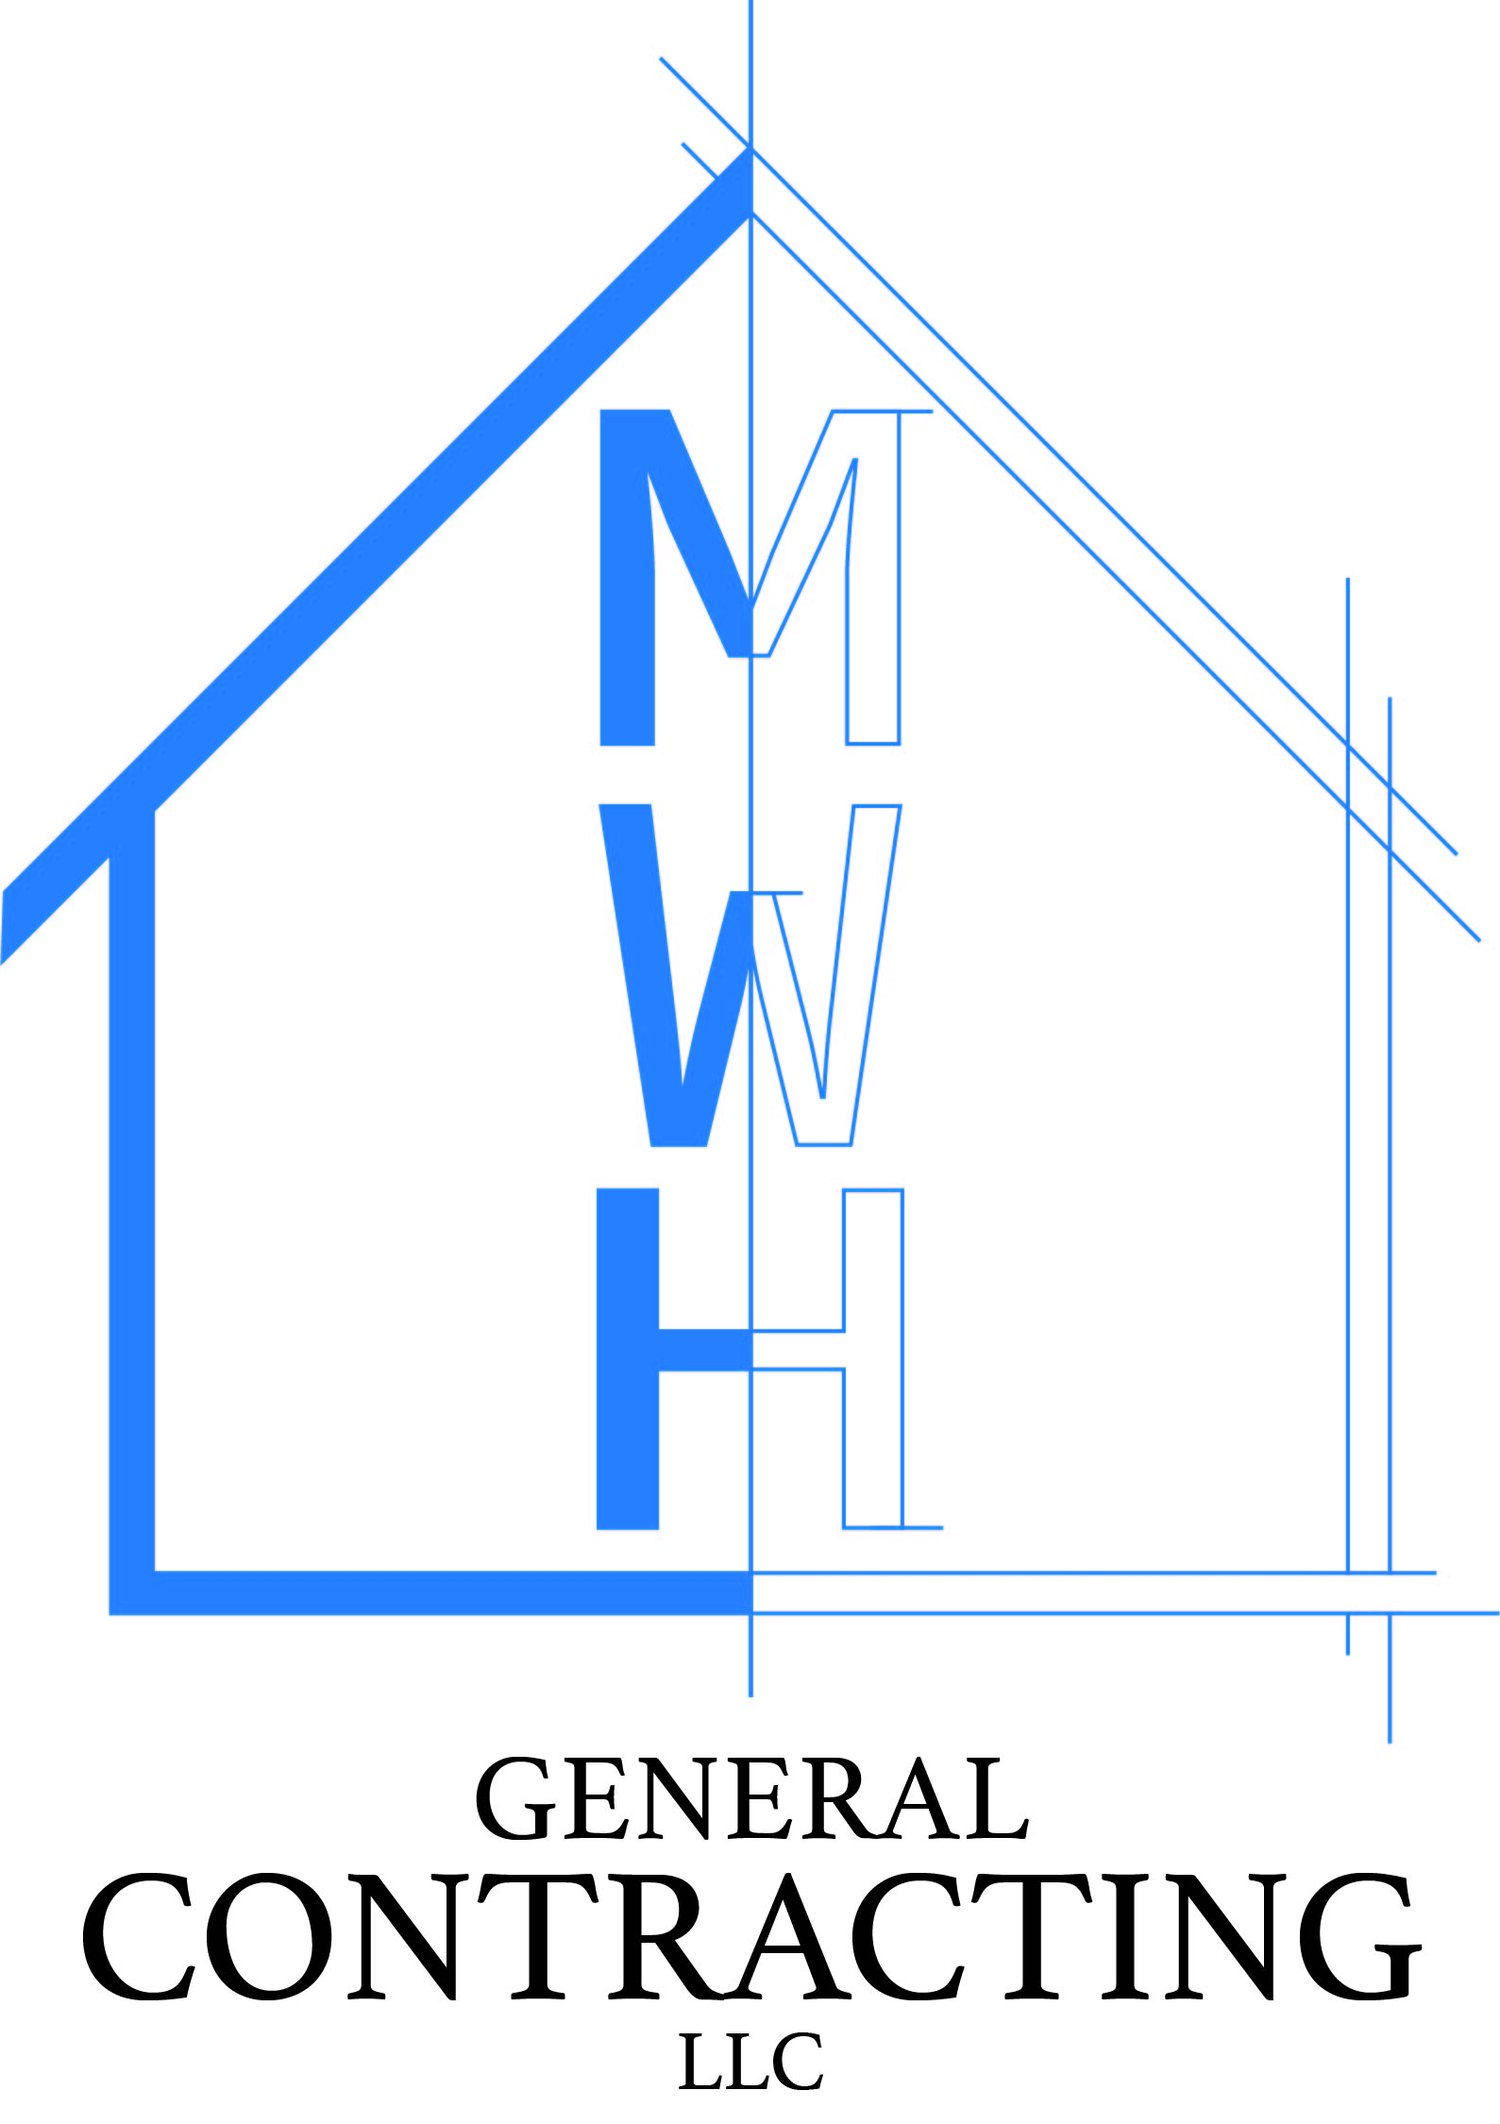 Mwh General Contracting